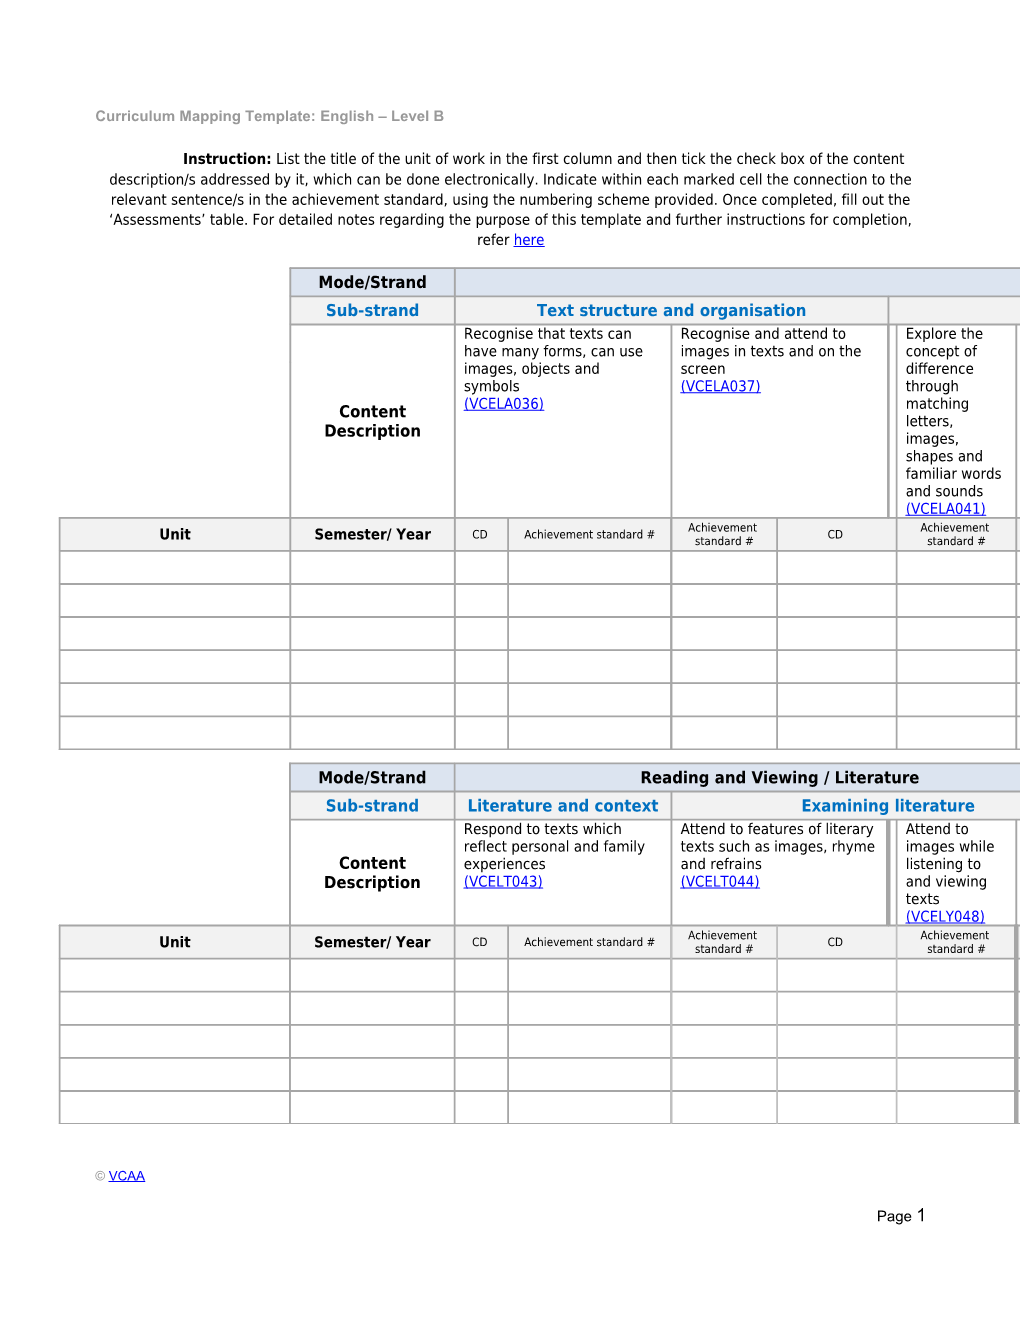 Curriculum Mapping Template: English Level B